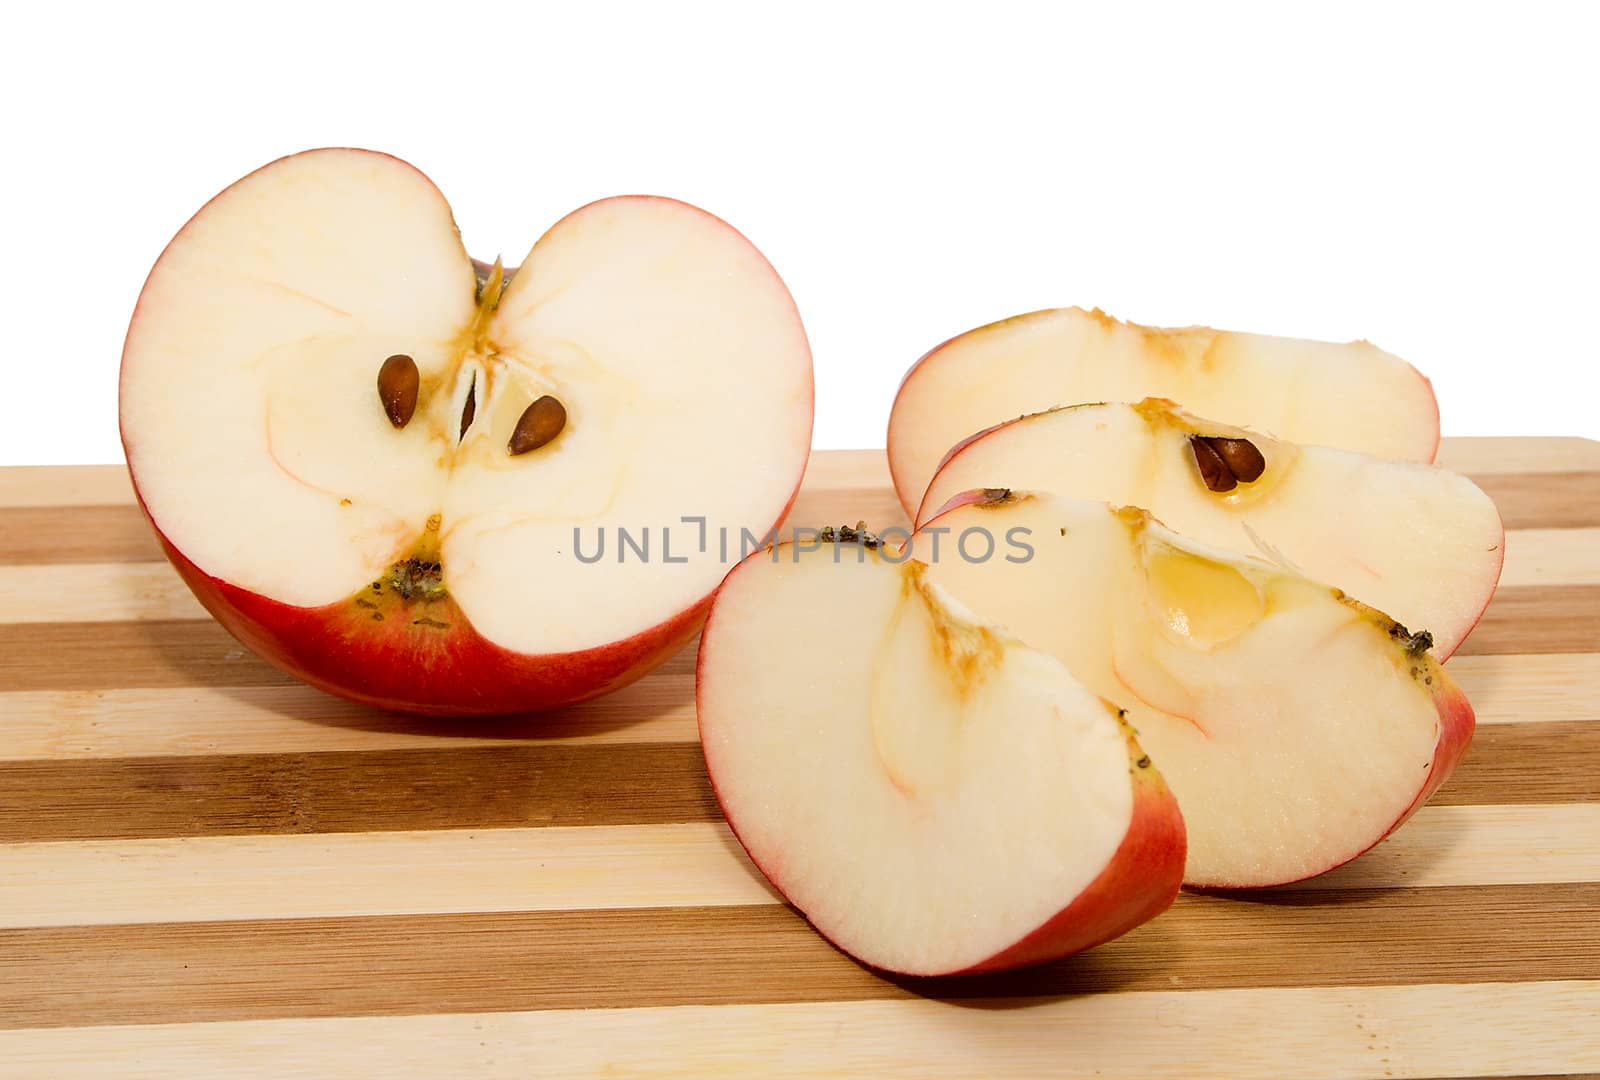 Red apple on chopping board